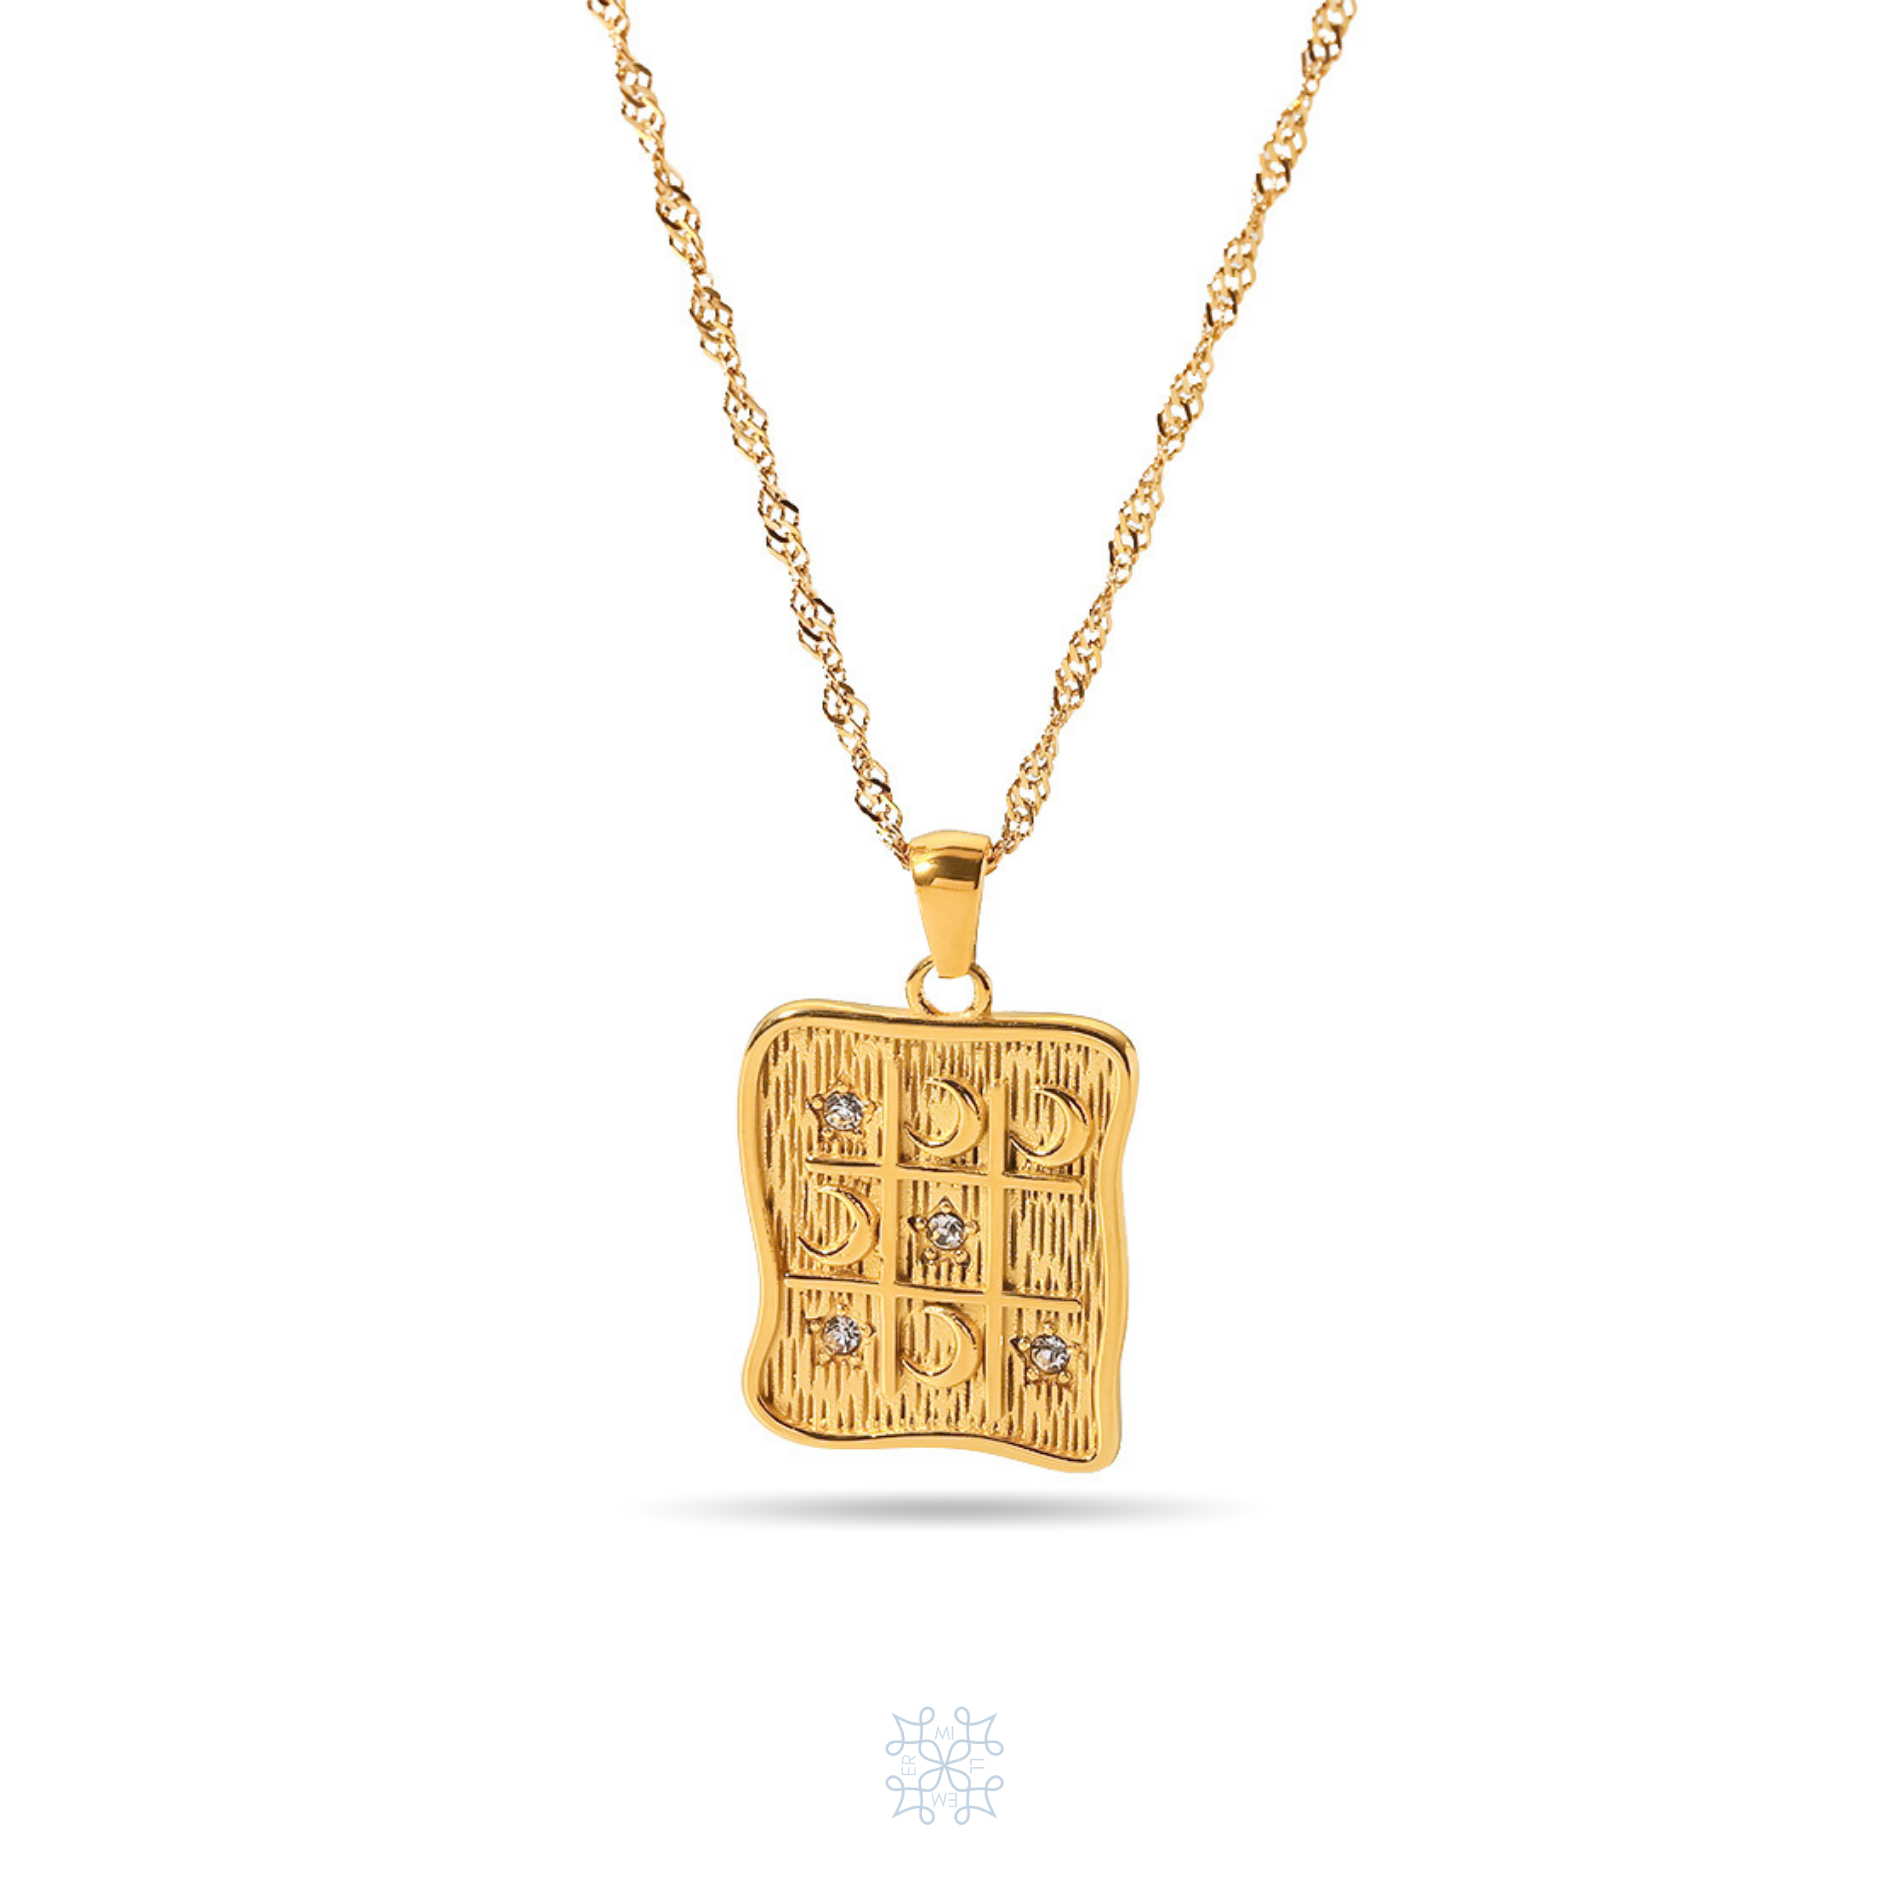 PAPIRUS Pendant Gold Necklace. Gold Papirus shaped pendant with a tris game engraved on it. The stars and the moon are engraved on every square of the papirus. On the stars are attched zircon stones.